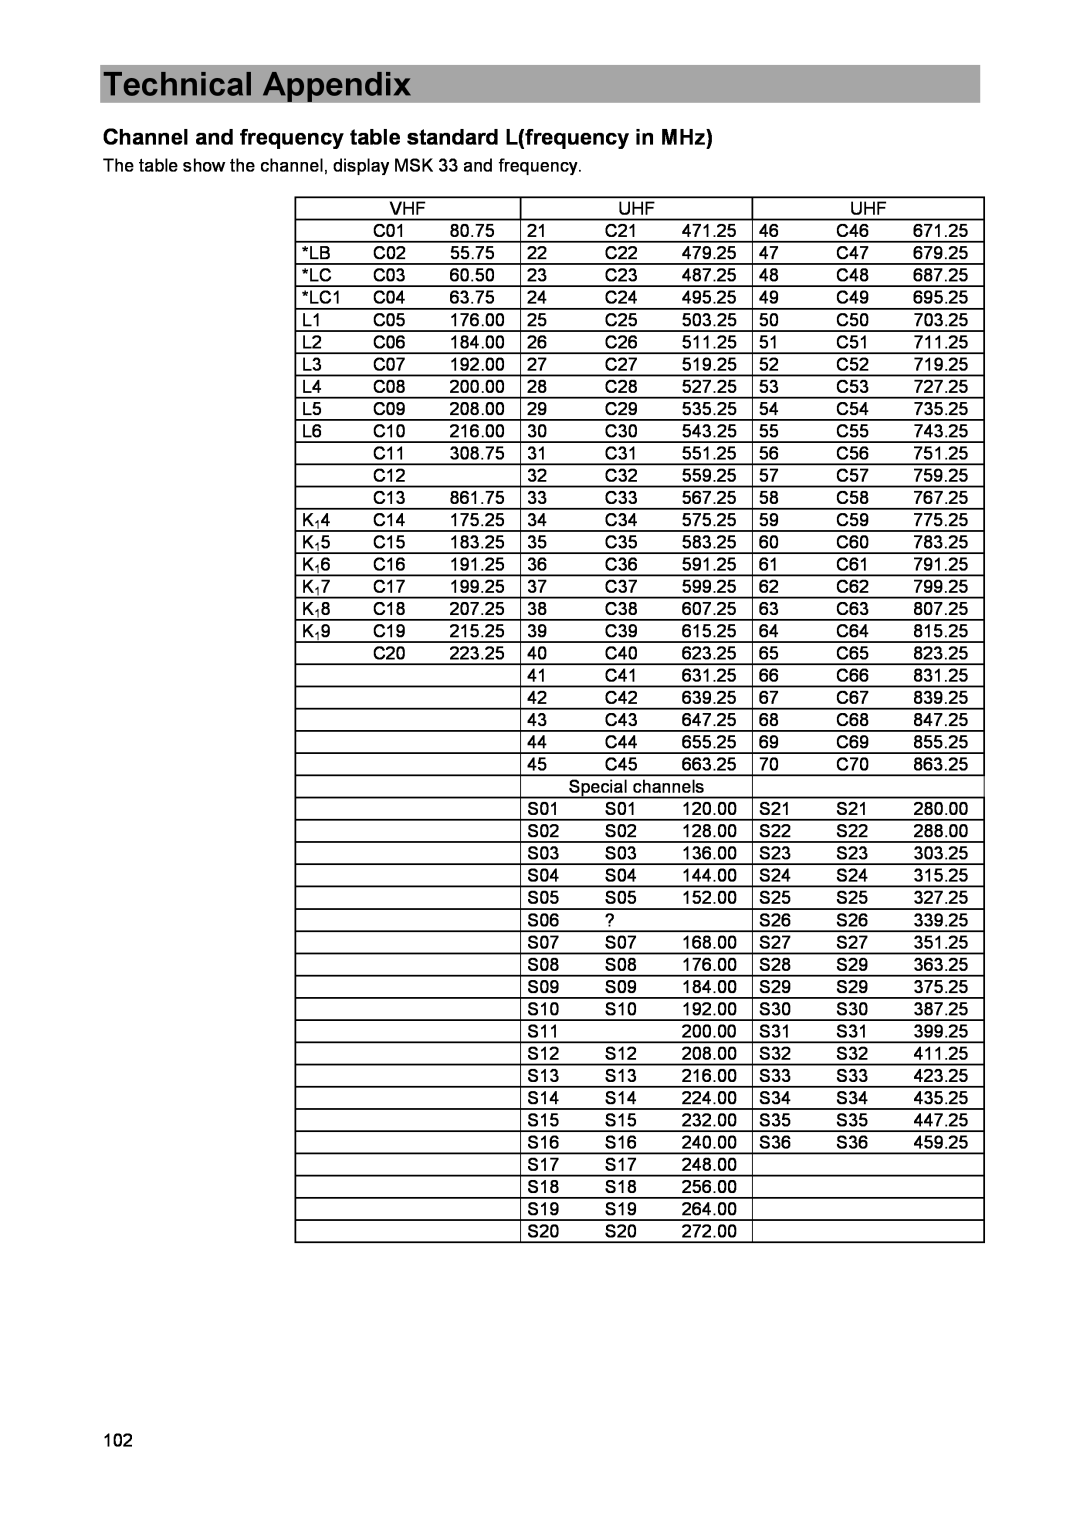 DreamGEAR MSK 33 manual Channel and frequency table standard Lfrequency in MHz, Technical Appendix 